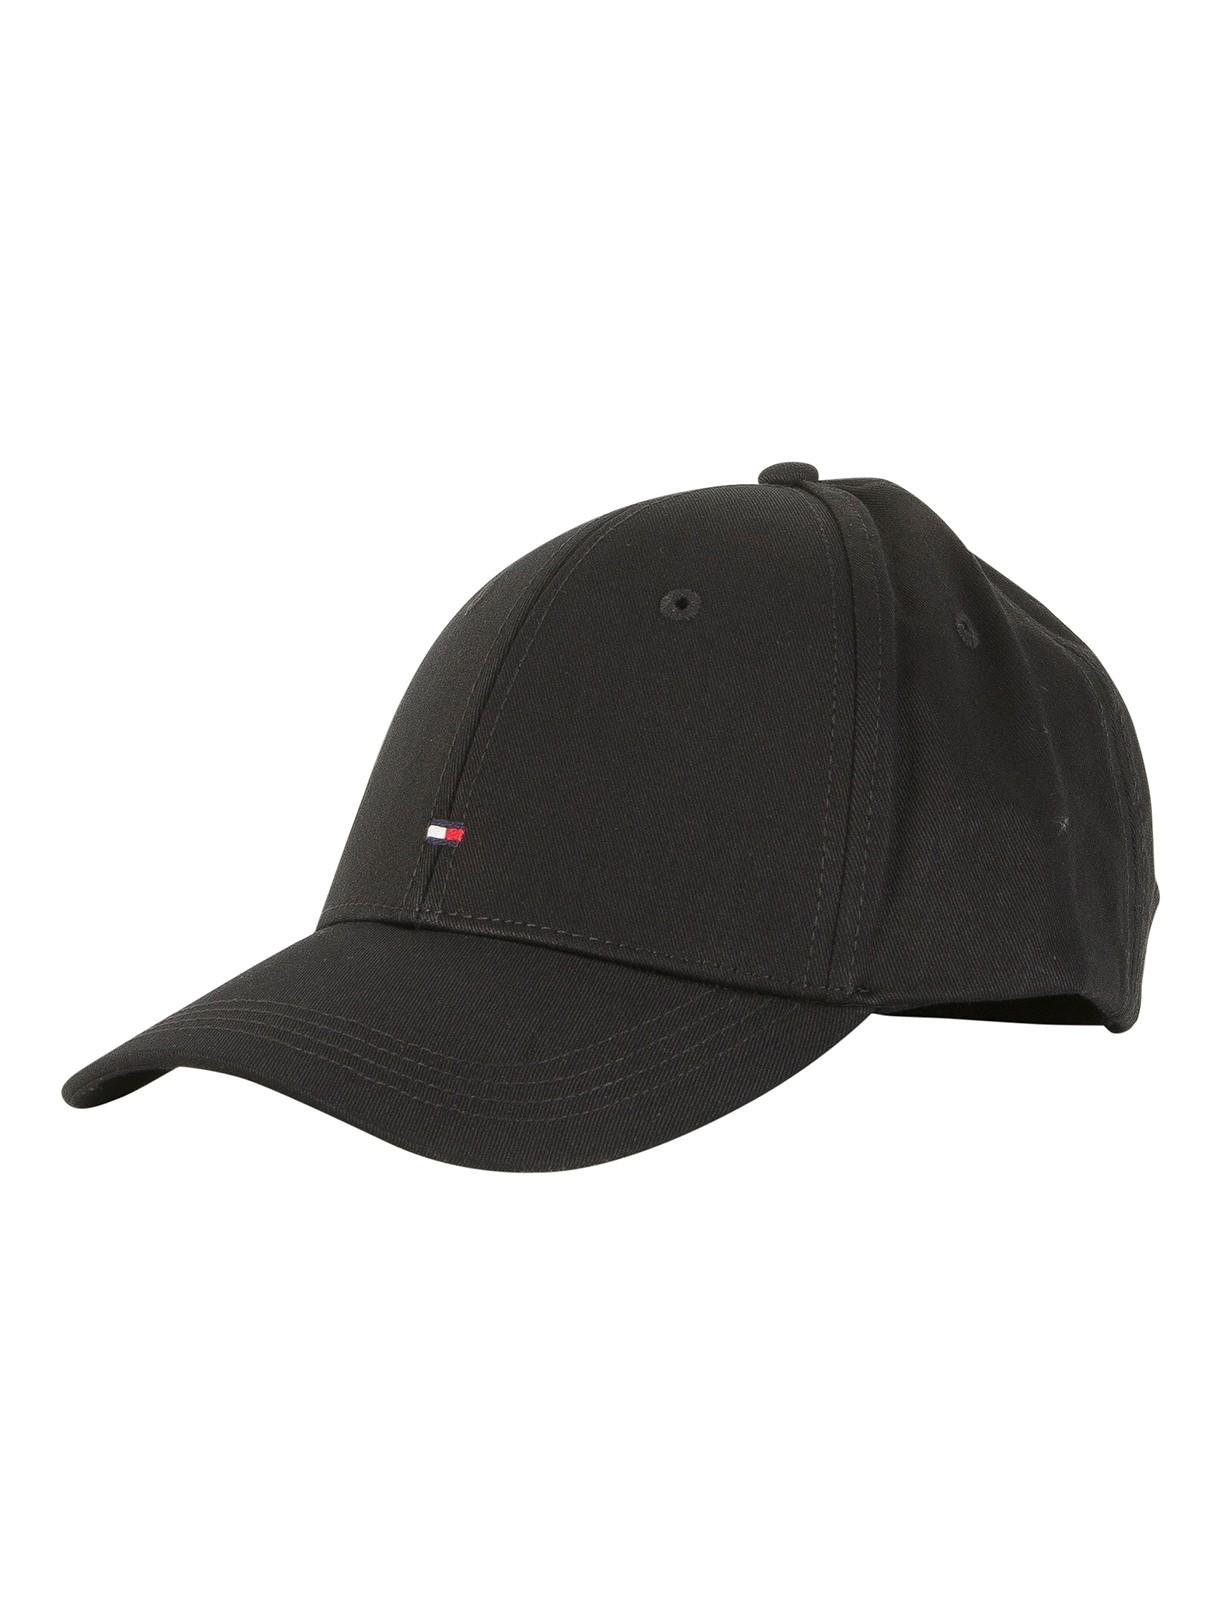 Tommy Hilfiger Cotton Classic Logo Baseball Cap in Black for Men - Save 41%  - Lyst